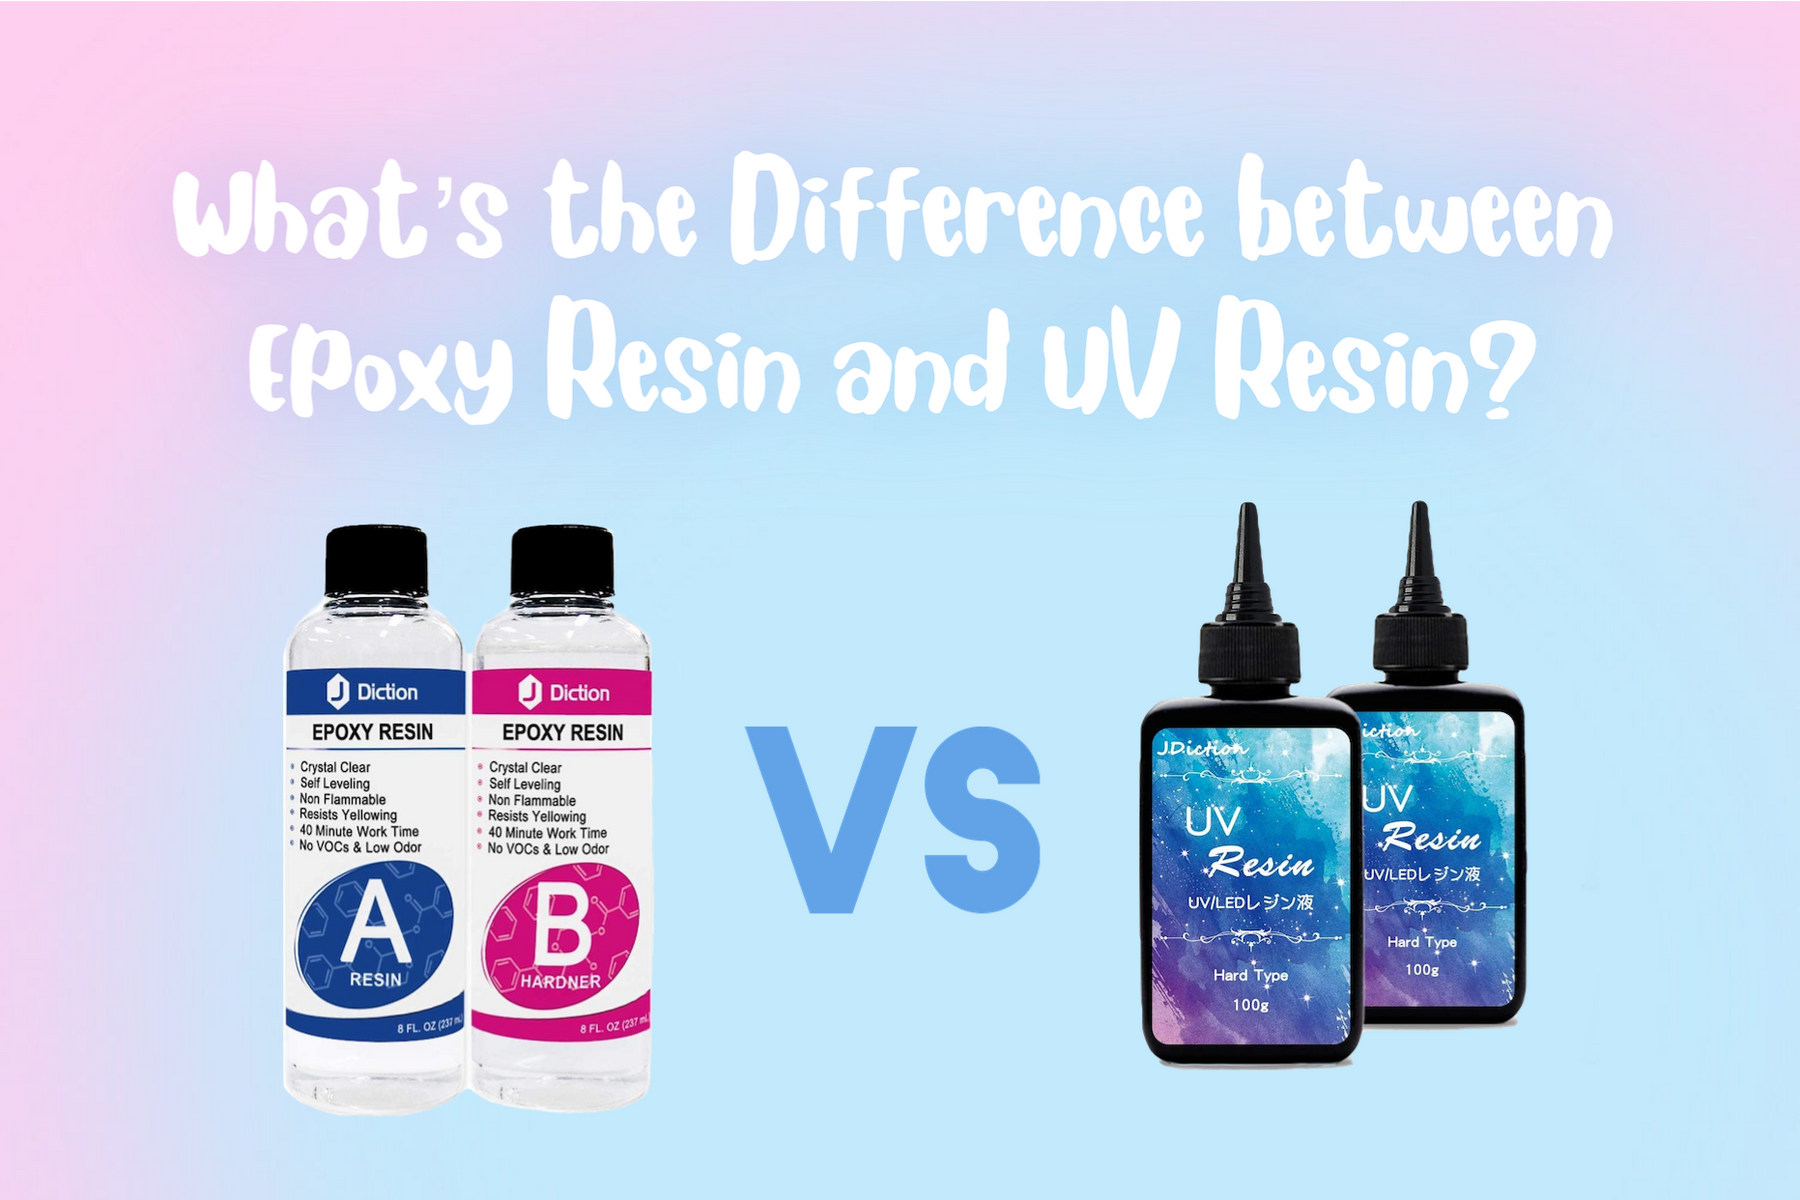 What’s the Difference between Epoxy Resin and UV Resin?